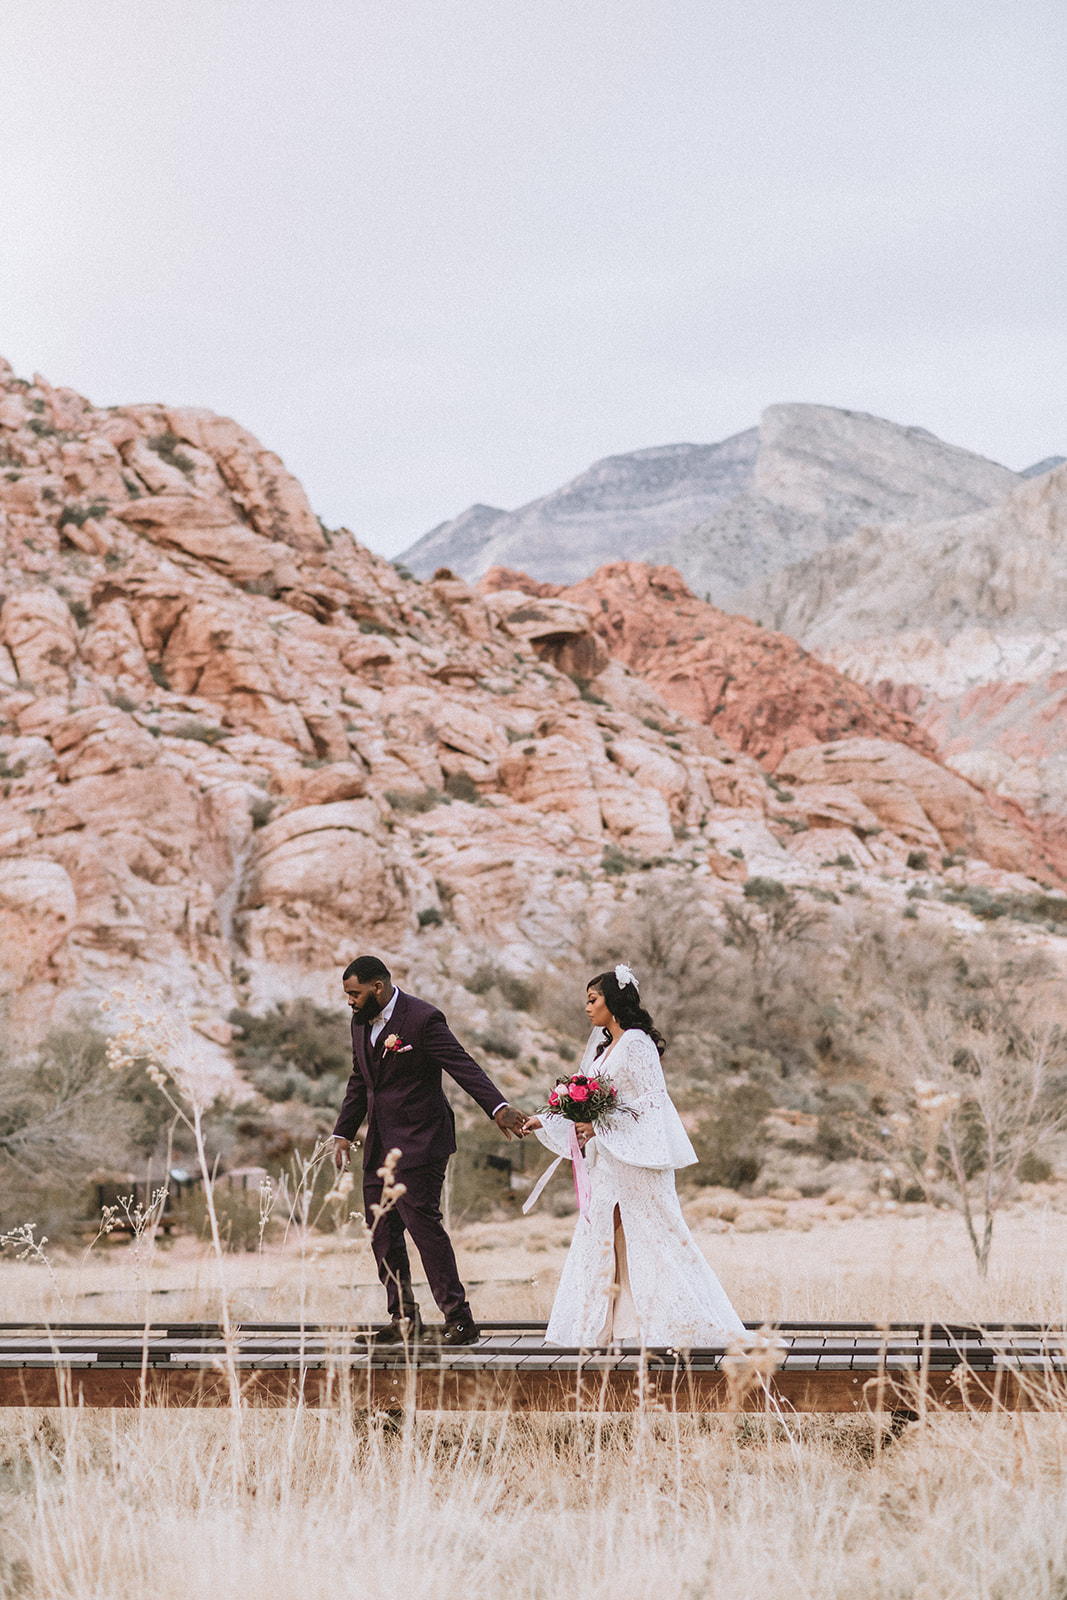 Bride and groom holding hands as they walk along the path during their elopement shoot organized by Elopement Las Vegas